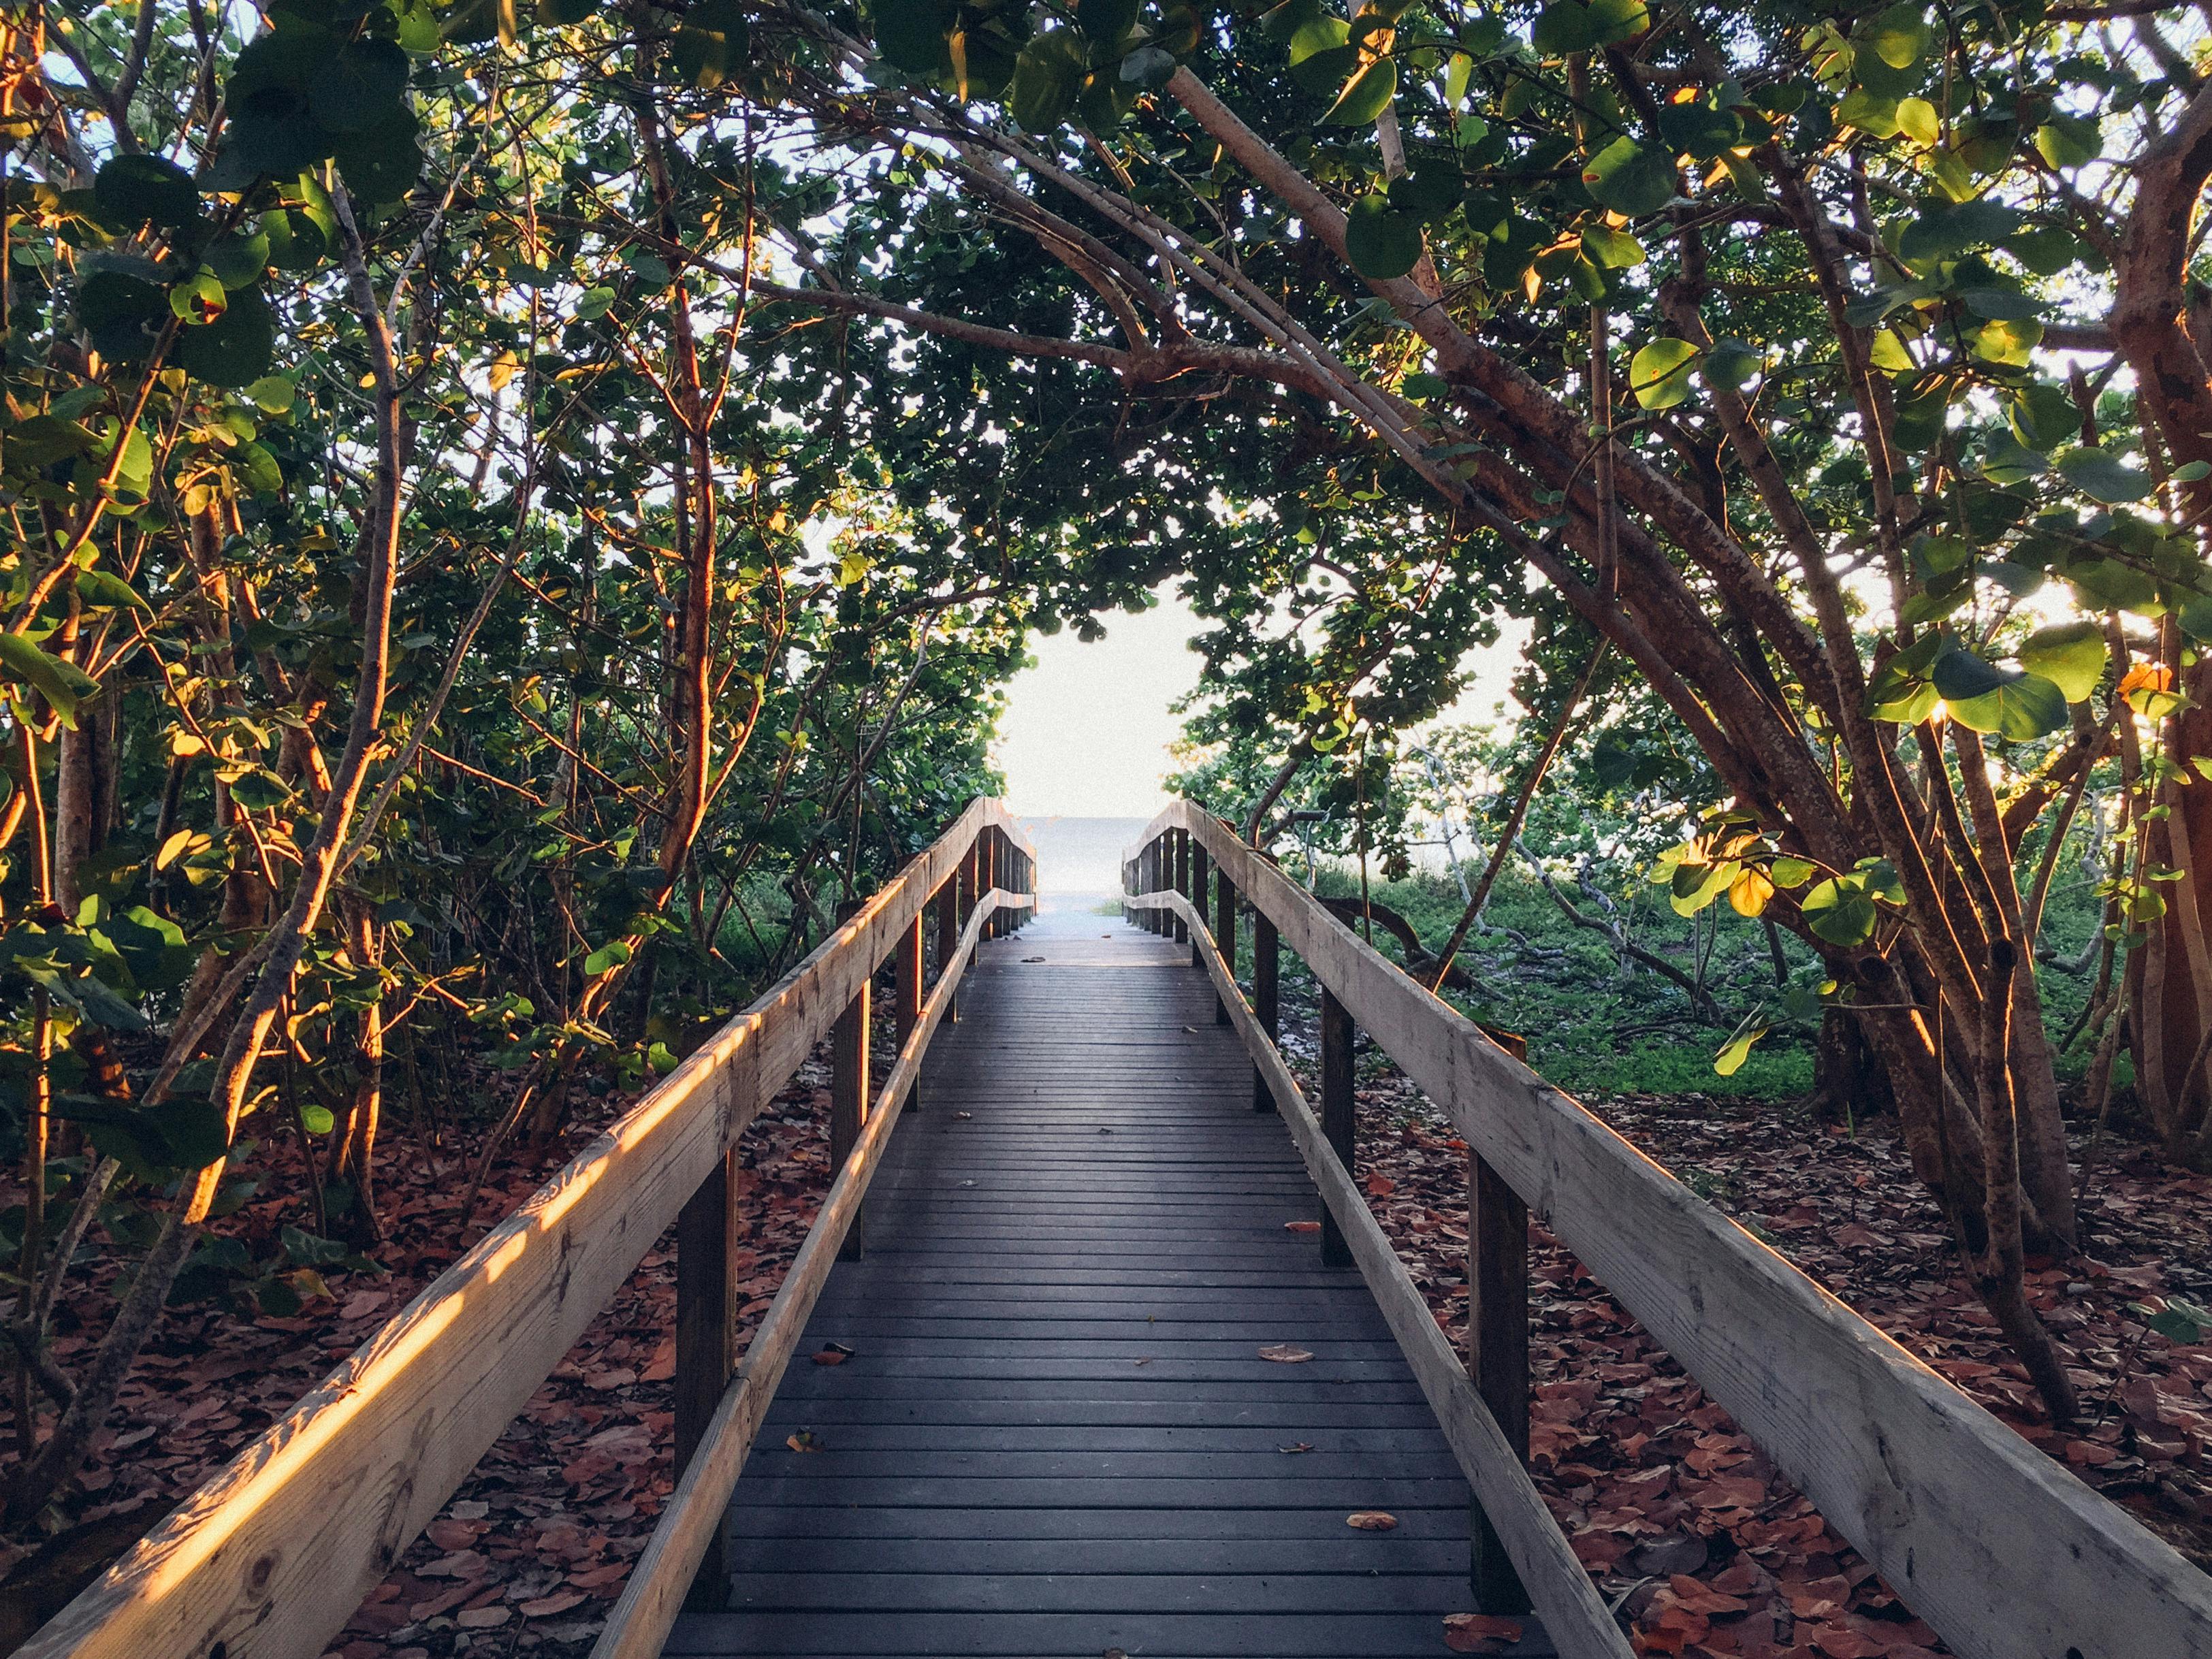 Nature Images · Pexels · Free Stock Photos